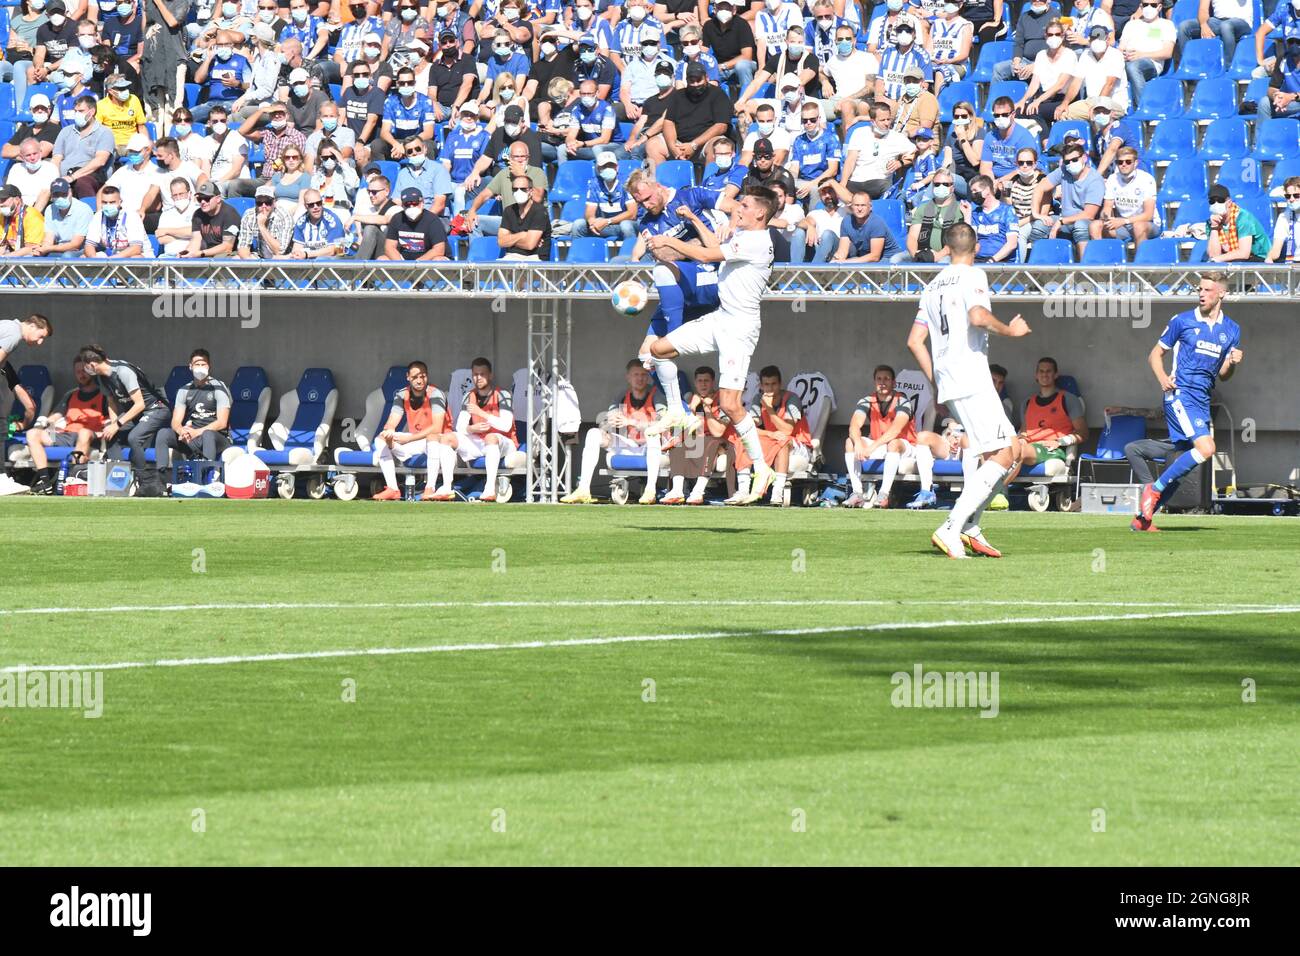 KSC looses against Fc St pauli 25 September 2021 in Wildparkstadion  karlsruhe second league club karlsruher SC Stock Photo - Alamy